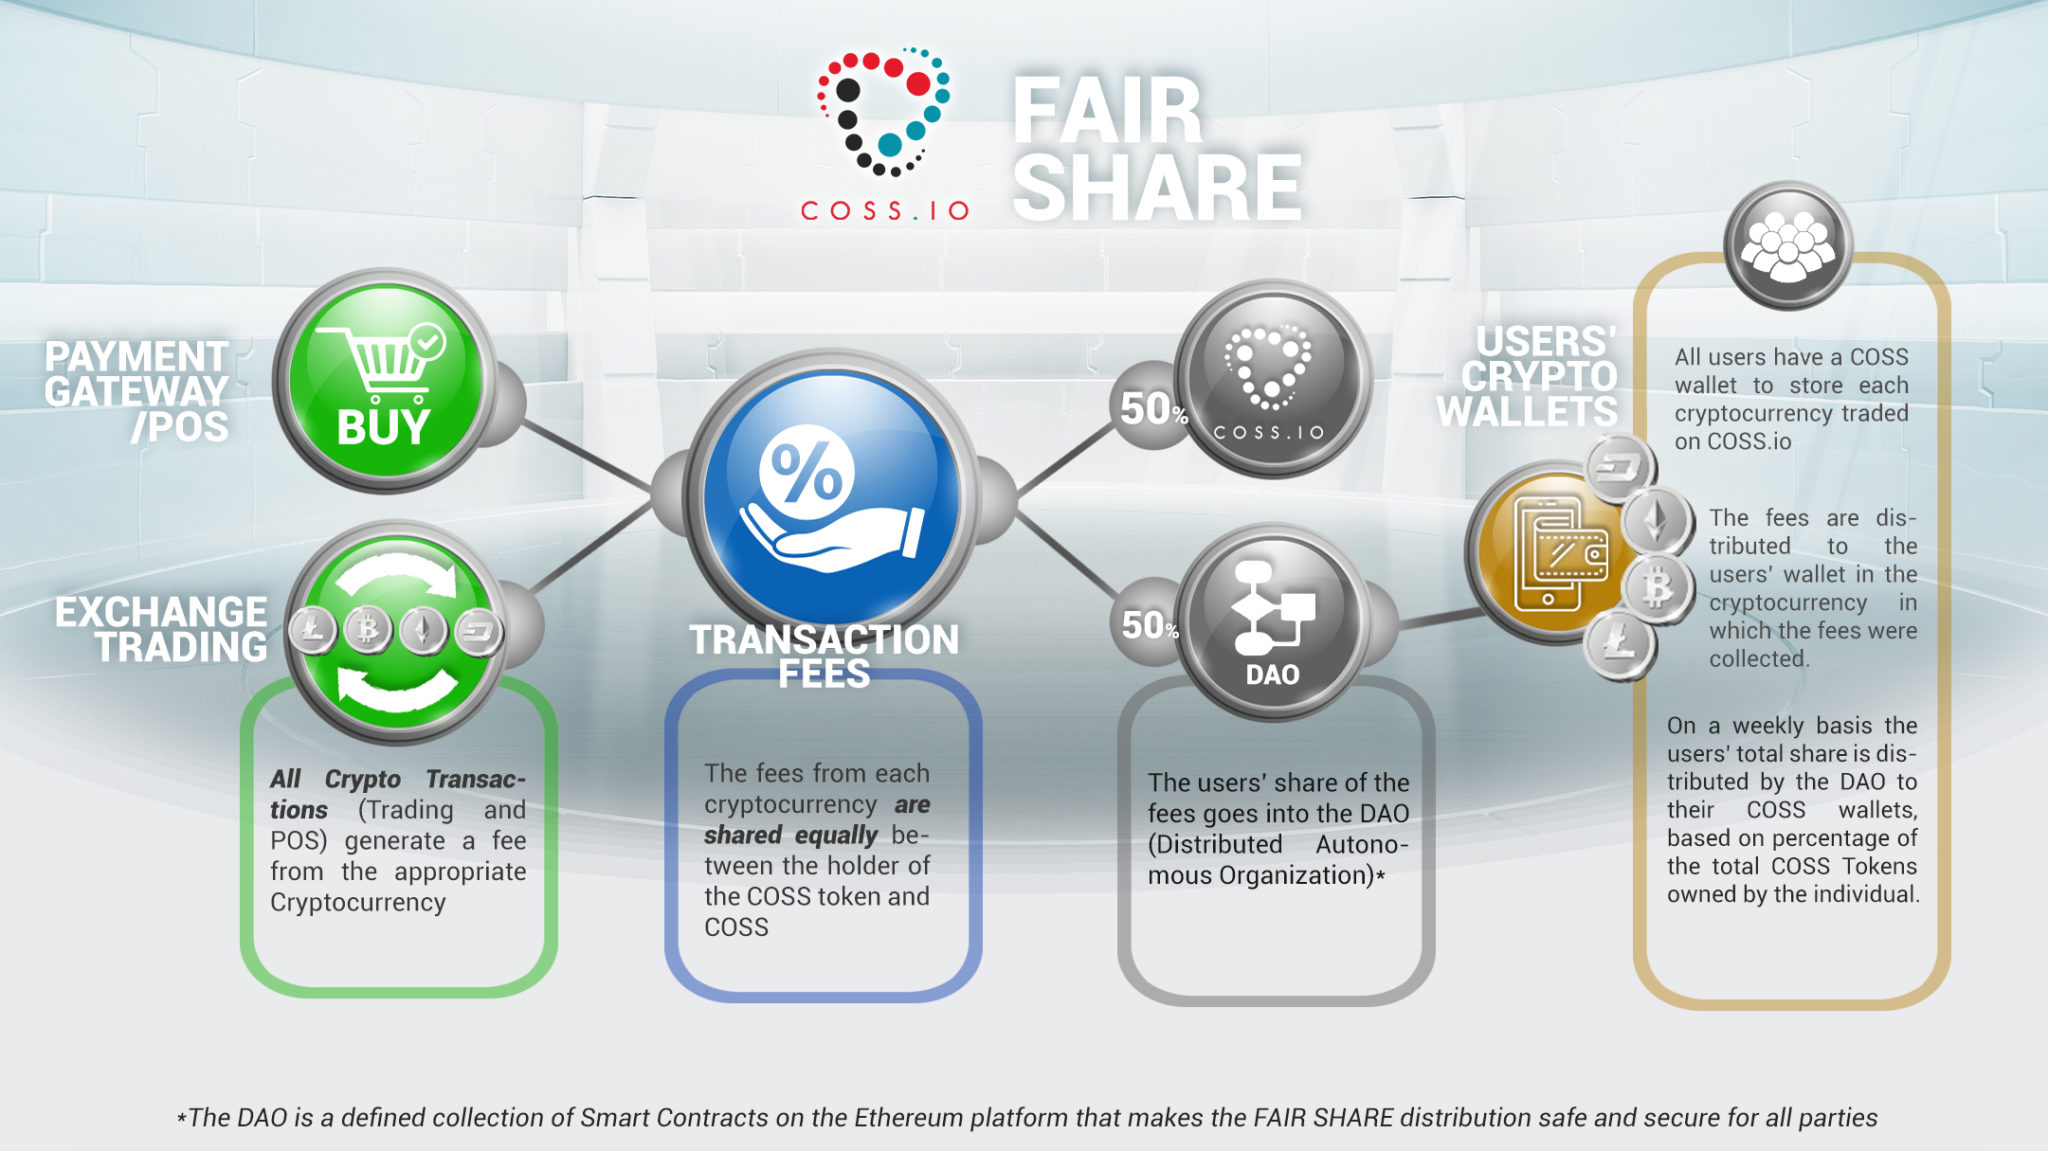 COSS pte ltd and their principle of "Fair Share"